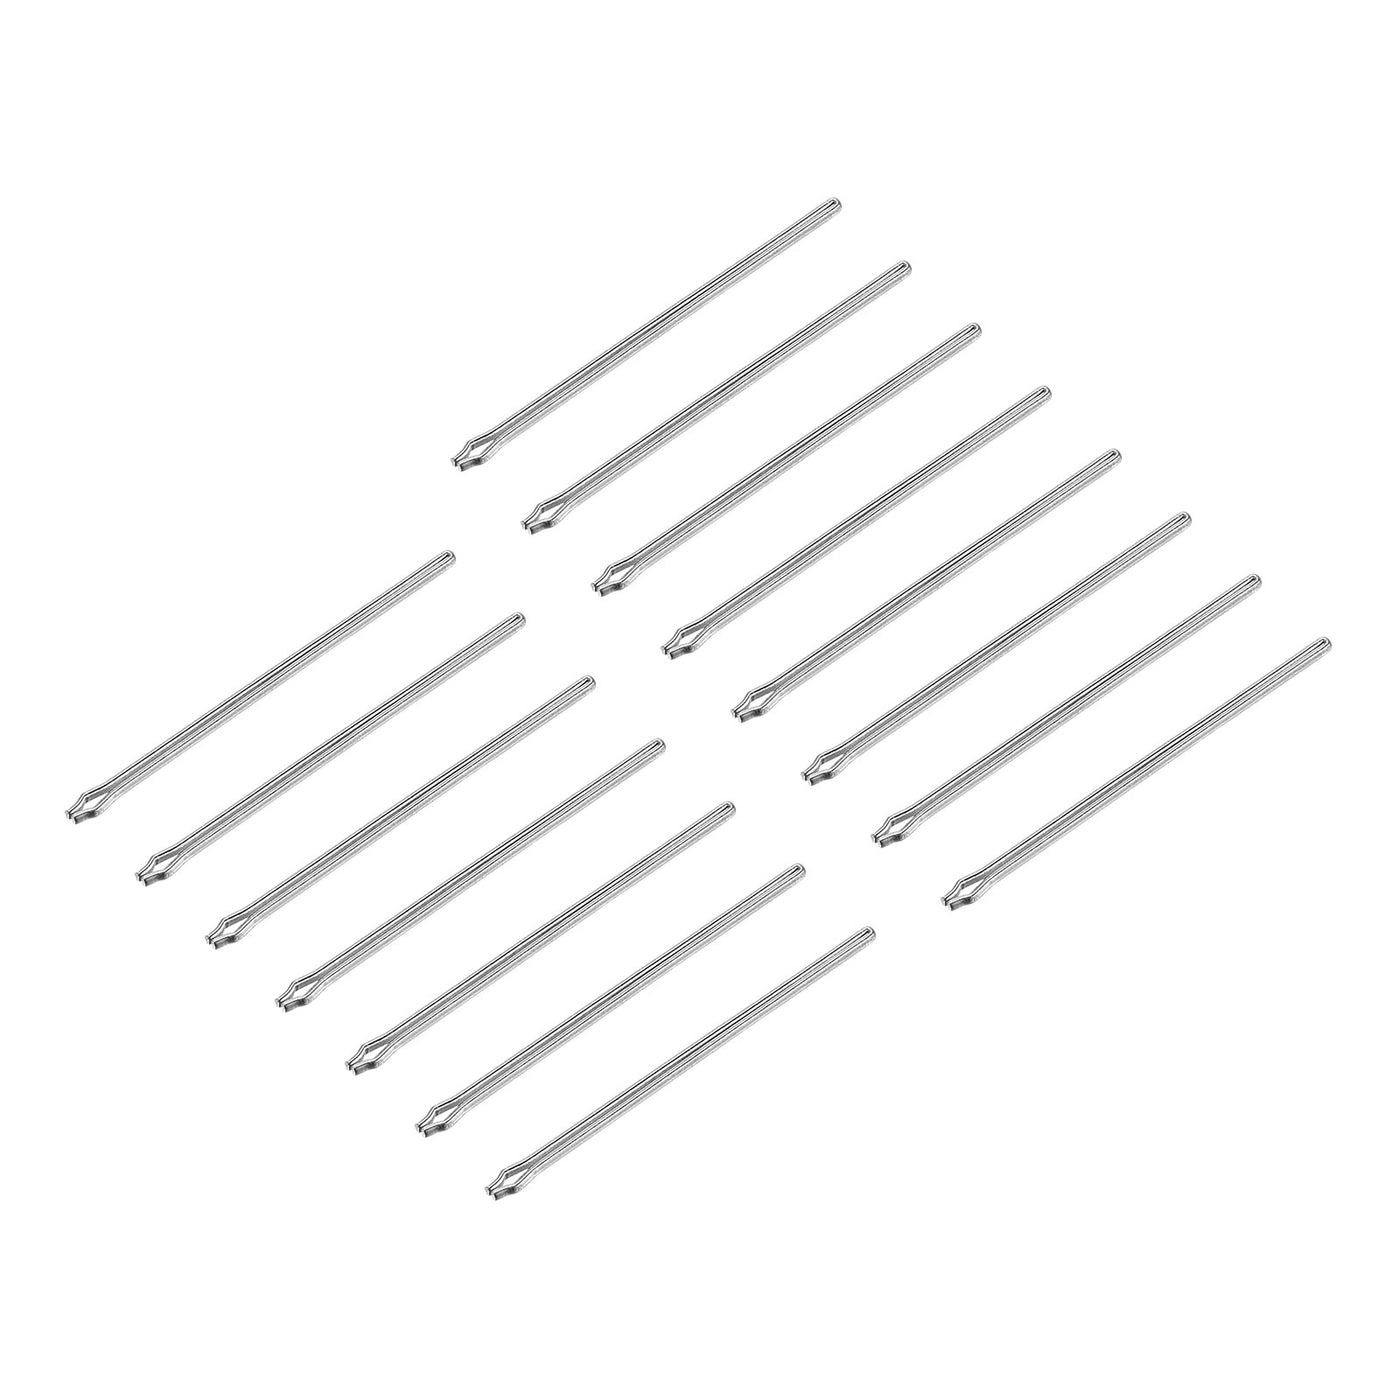 Uxcell Uxcell 15Pcs 18mm Watch Band Link Cotter Pin, Stainless Steel 0.8mm Dia. Silver Tone